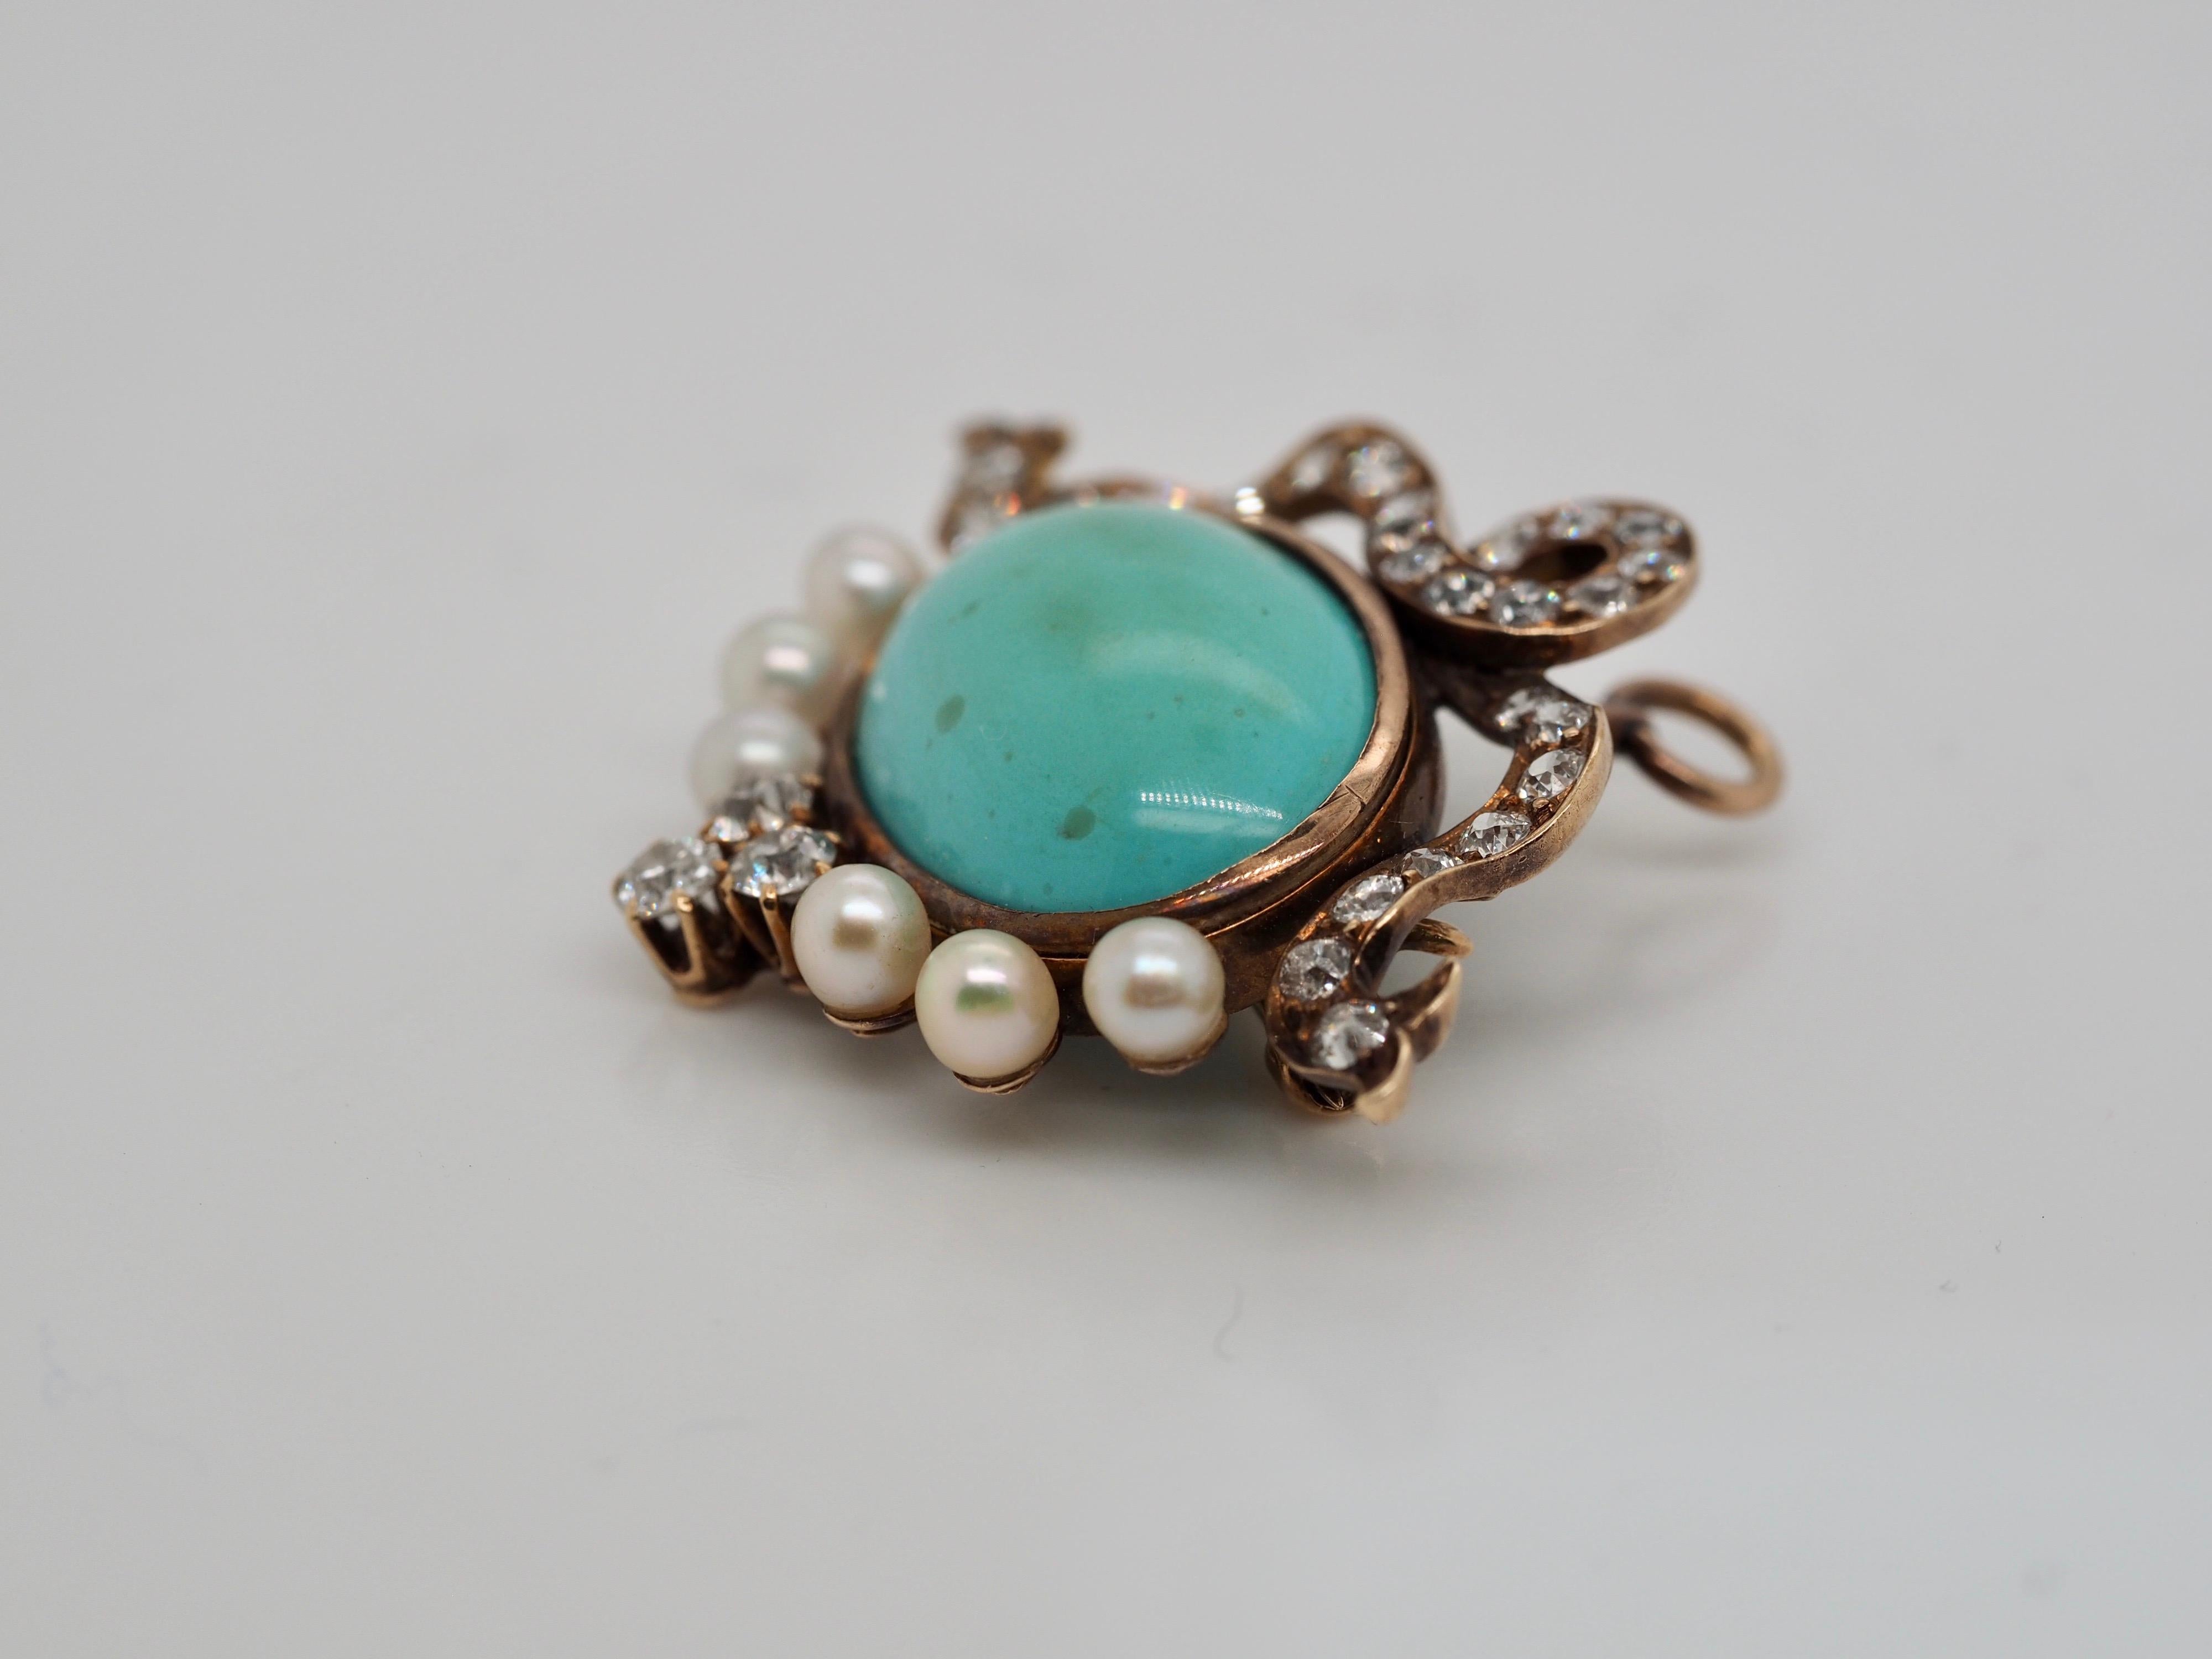 Women's or Men's Vintage Turquoise Diamond and Pearl Brooch/Pendant in 14 Karat Yellow Gold